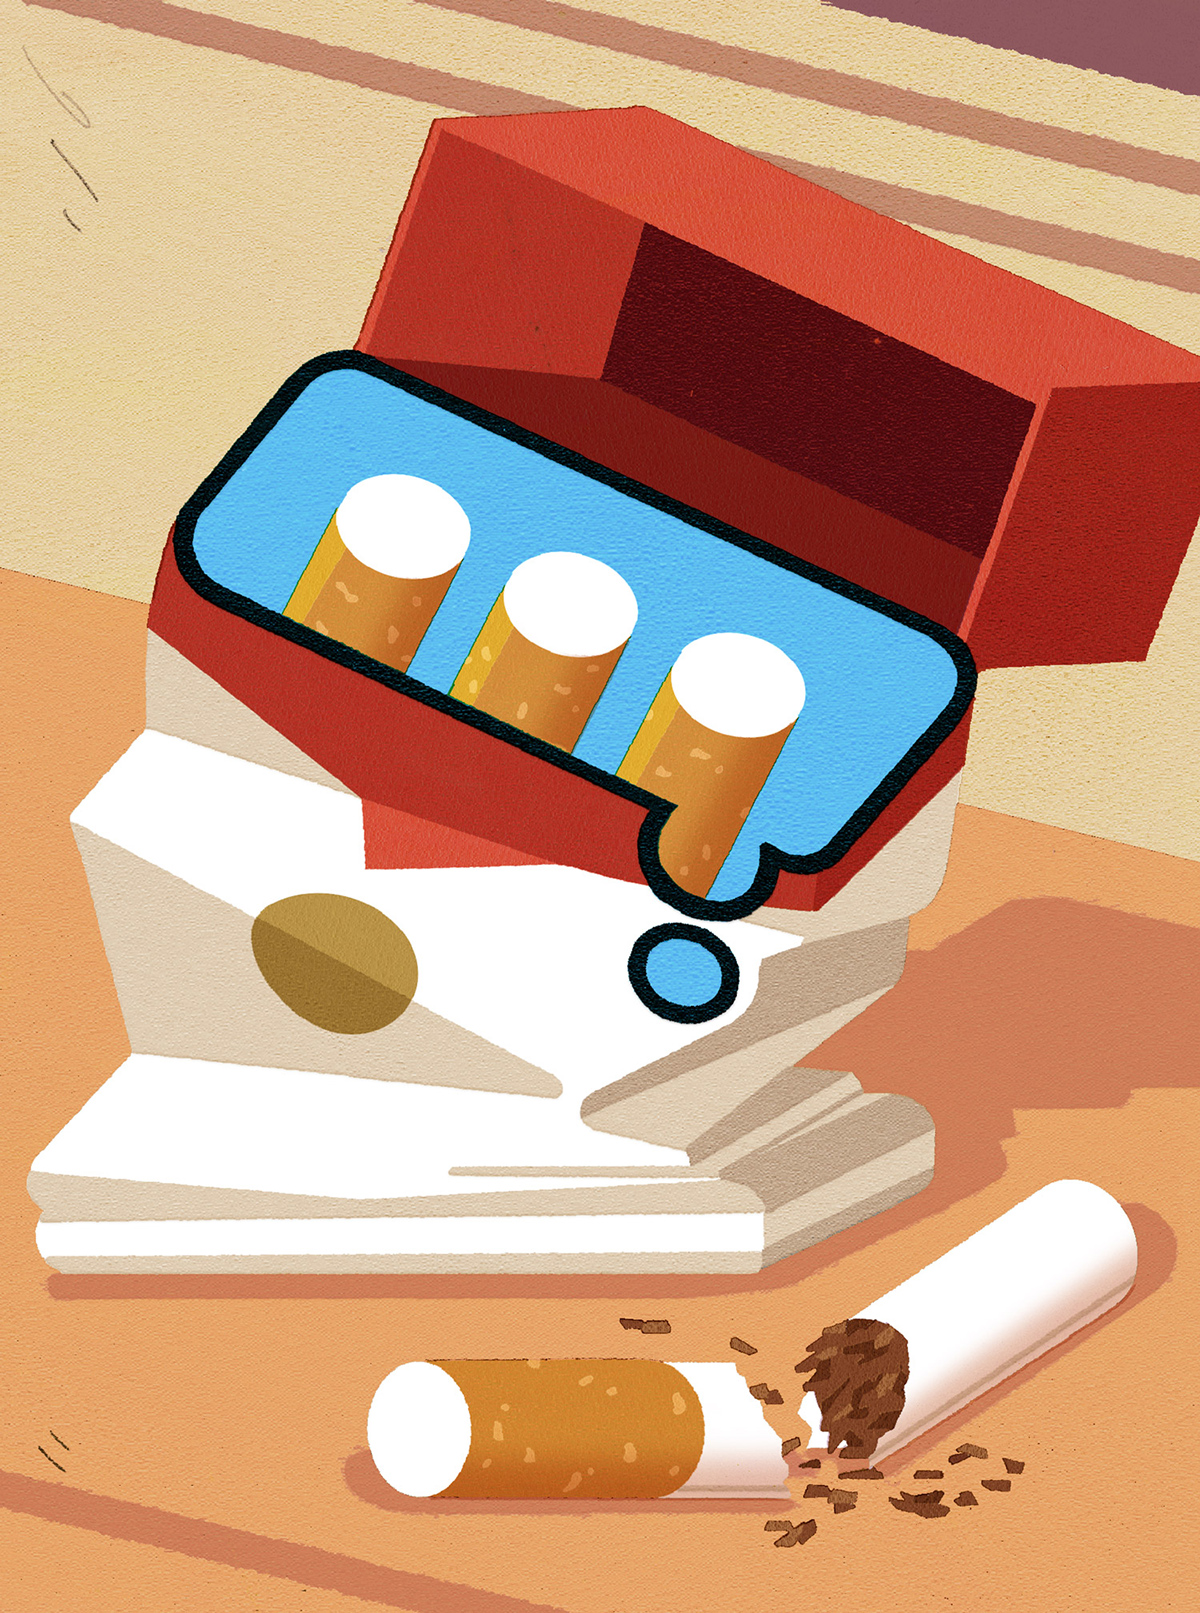 Digital illustration of a cigarette box containing three cigarettes. The bottom of the box is crushed, and there's a cigarette broken in half lying on the ground.